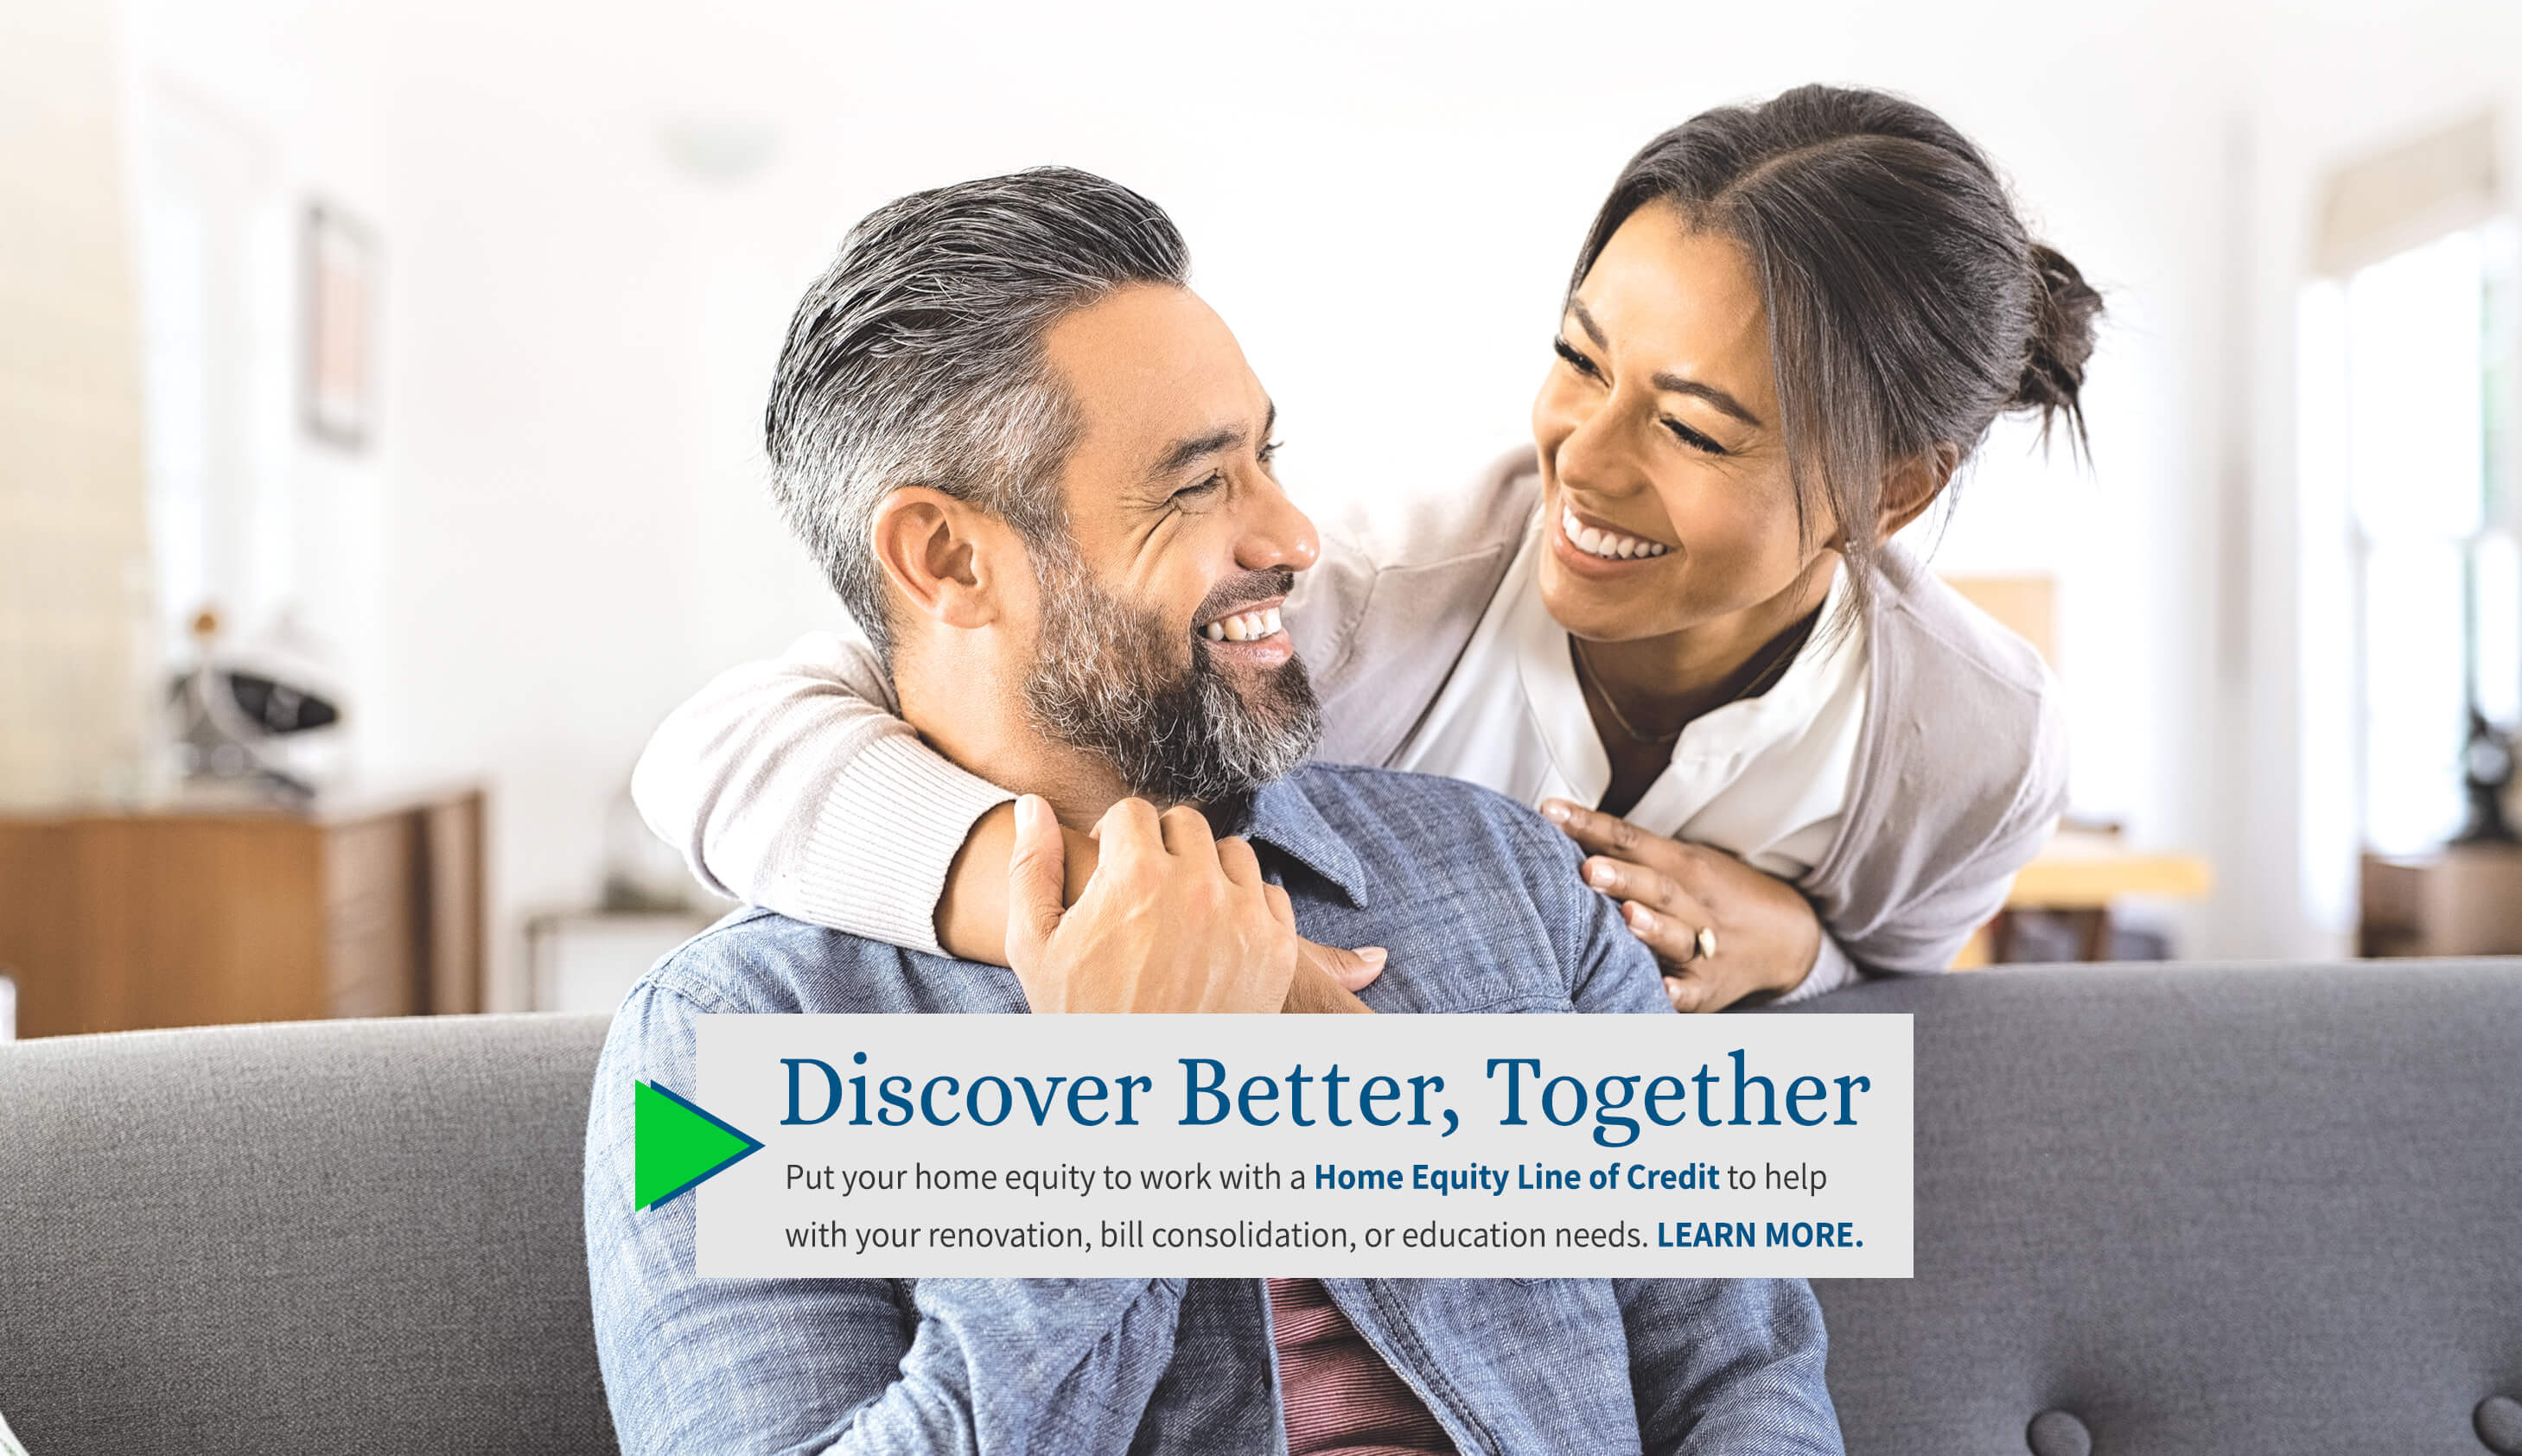 Discover Better, Together. Put your home equity to work with a Hone Equity Line of Credit to help with your renovation, bill consolidation, or education needs. Learn More. 